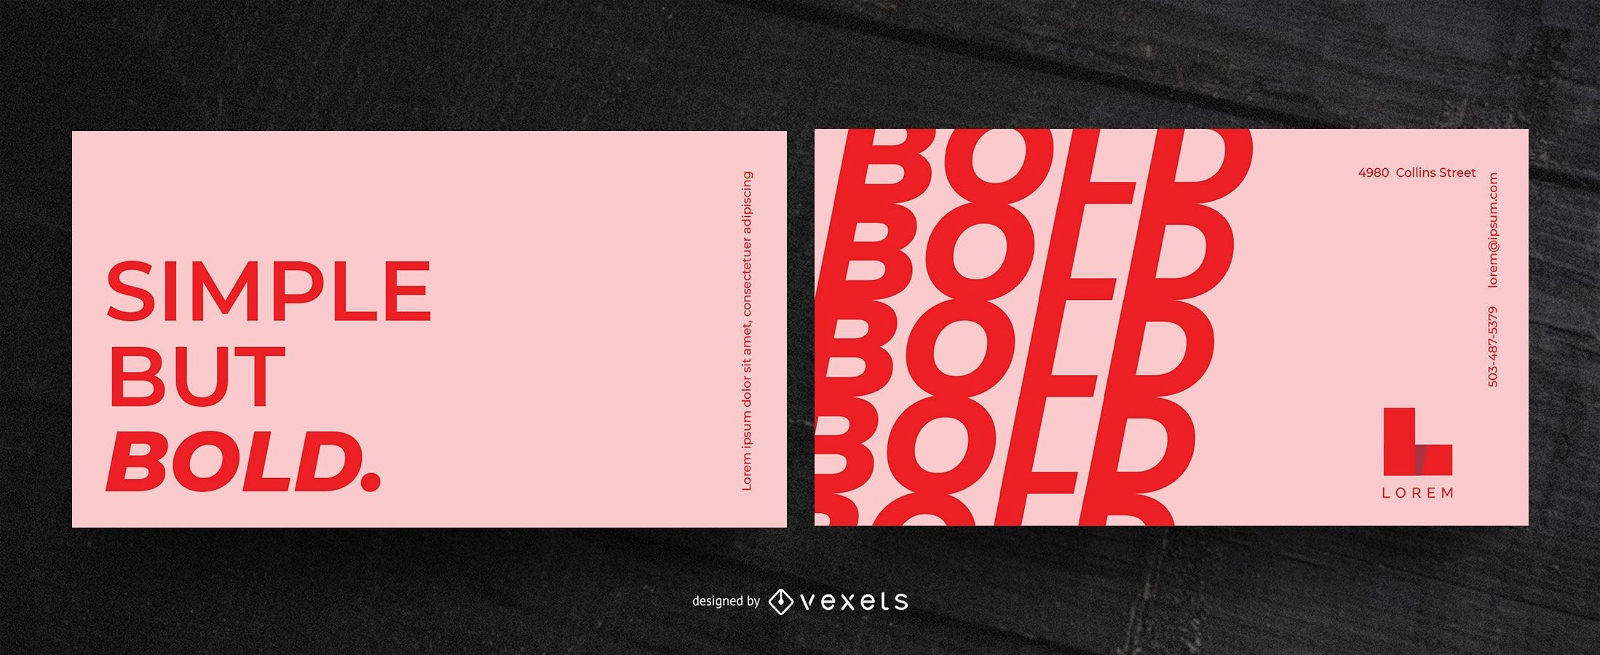 Simple bold business card template